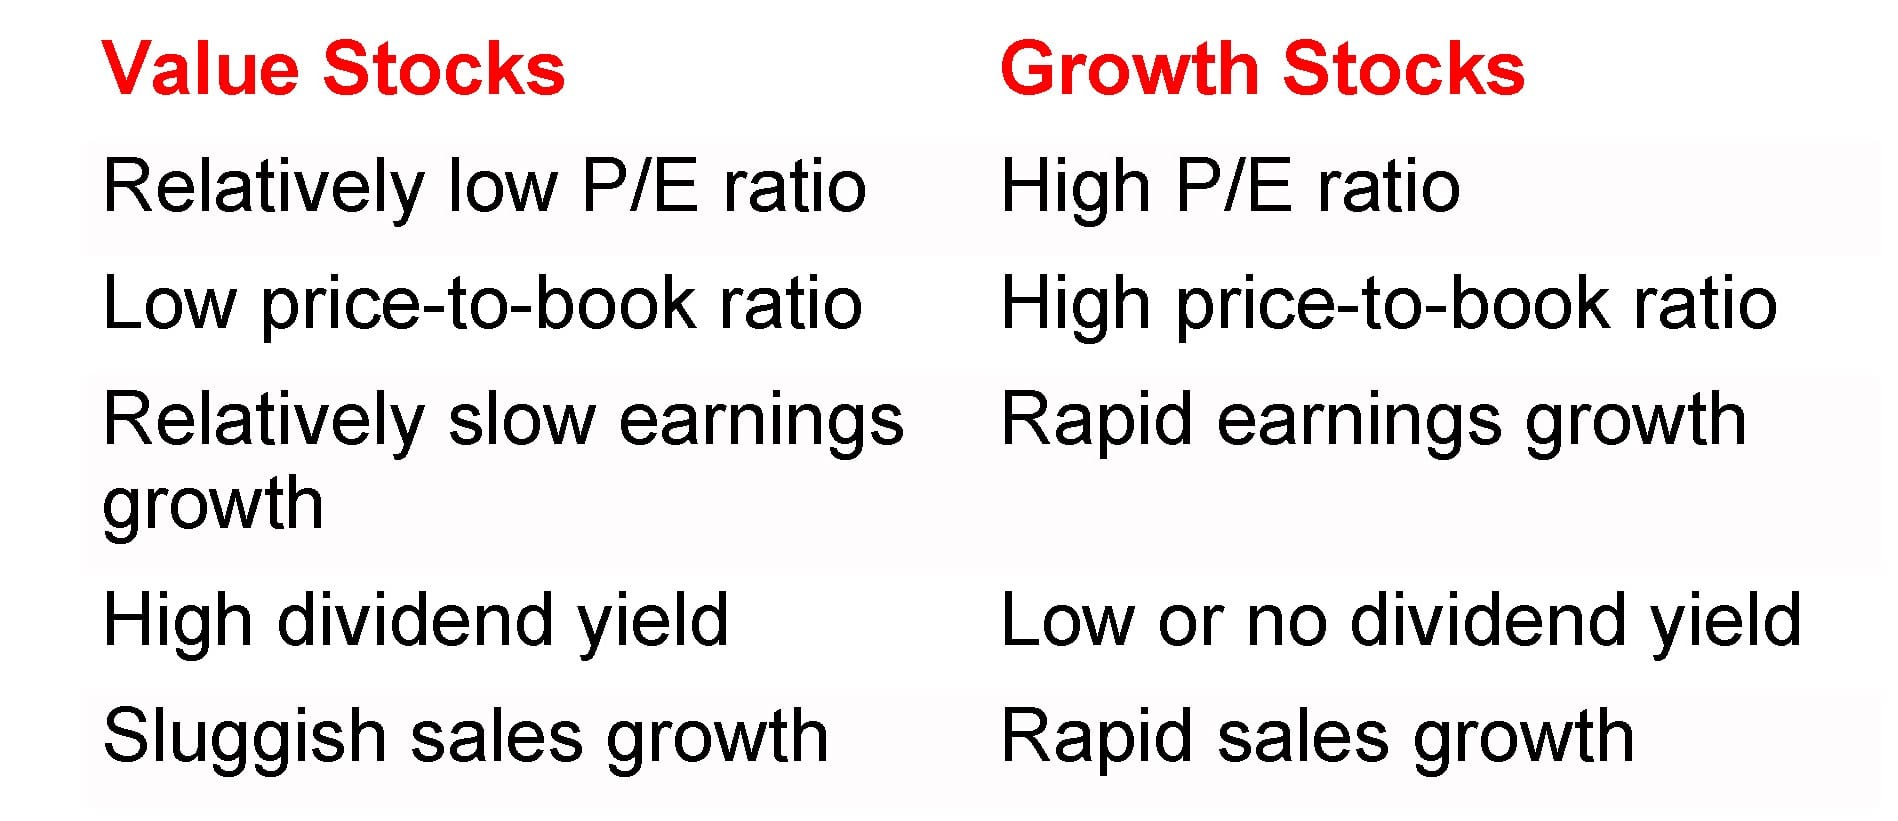 Chart info: Value Stocks -Relatively low P/E ratio Growth Stocks-High P/E ratio Value Stocks-Low price-to-book ratio Growth Stocks-High price-to-book ratio Value Stocks-Relatively slow earnings Growth Stocks-Rapid earnings growth growth Value Stocks-High dividend yield Growth Stocks-Low or no dividend yield Value Stocks-Sluggish sales growth Growth Stocks-Rapid sales growth. Article title: Growth vs. Value: What's the Difference?